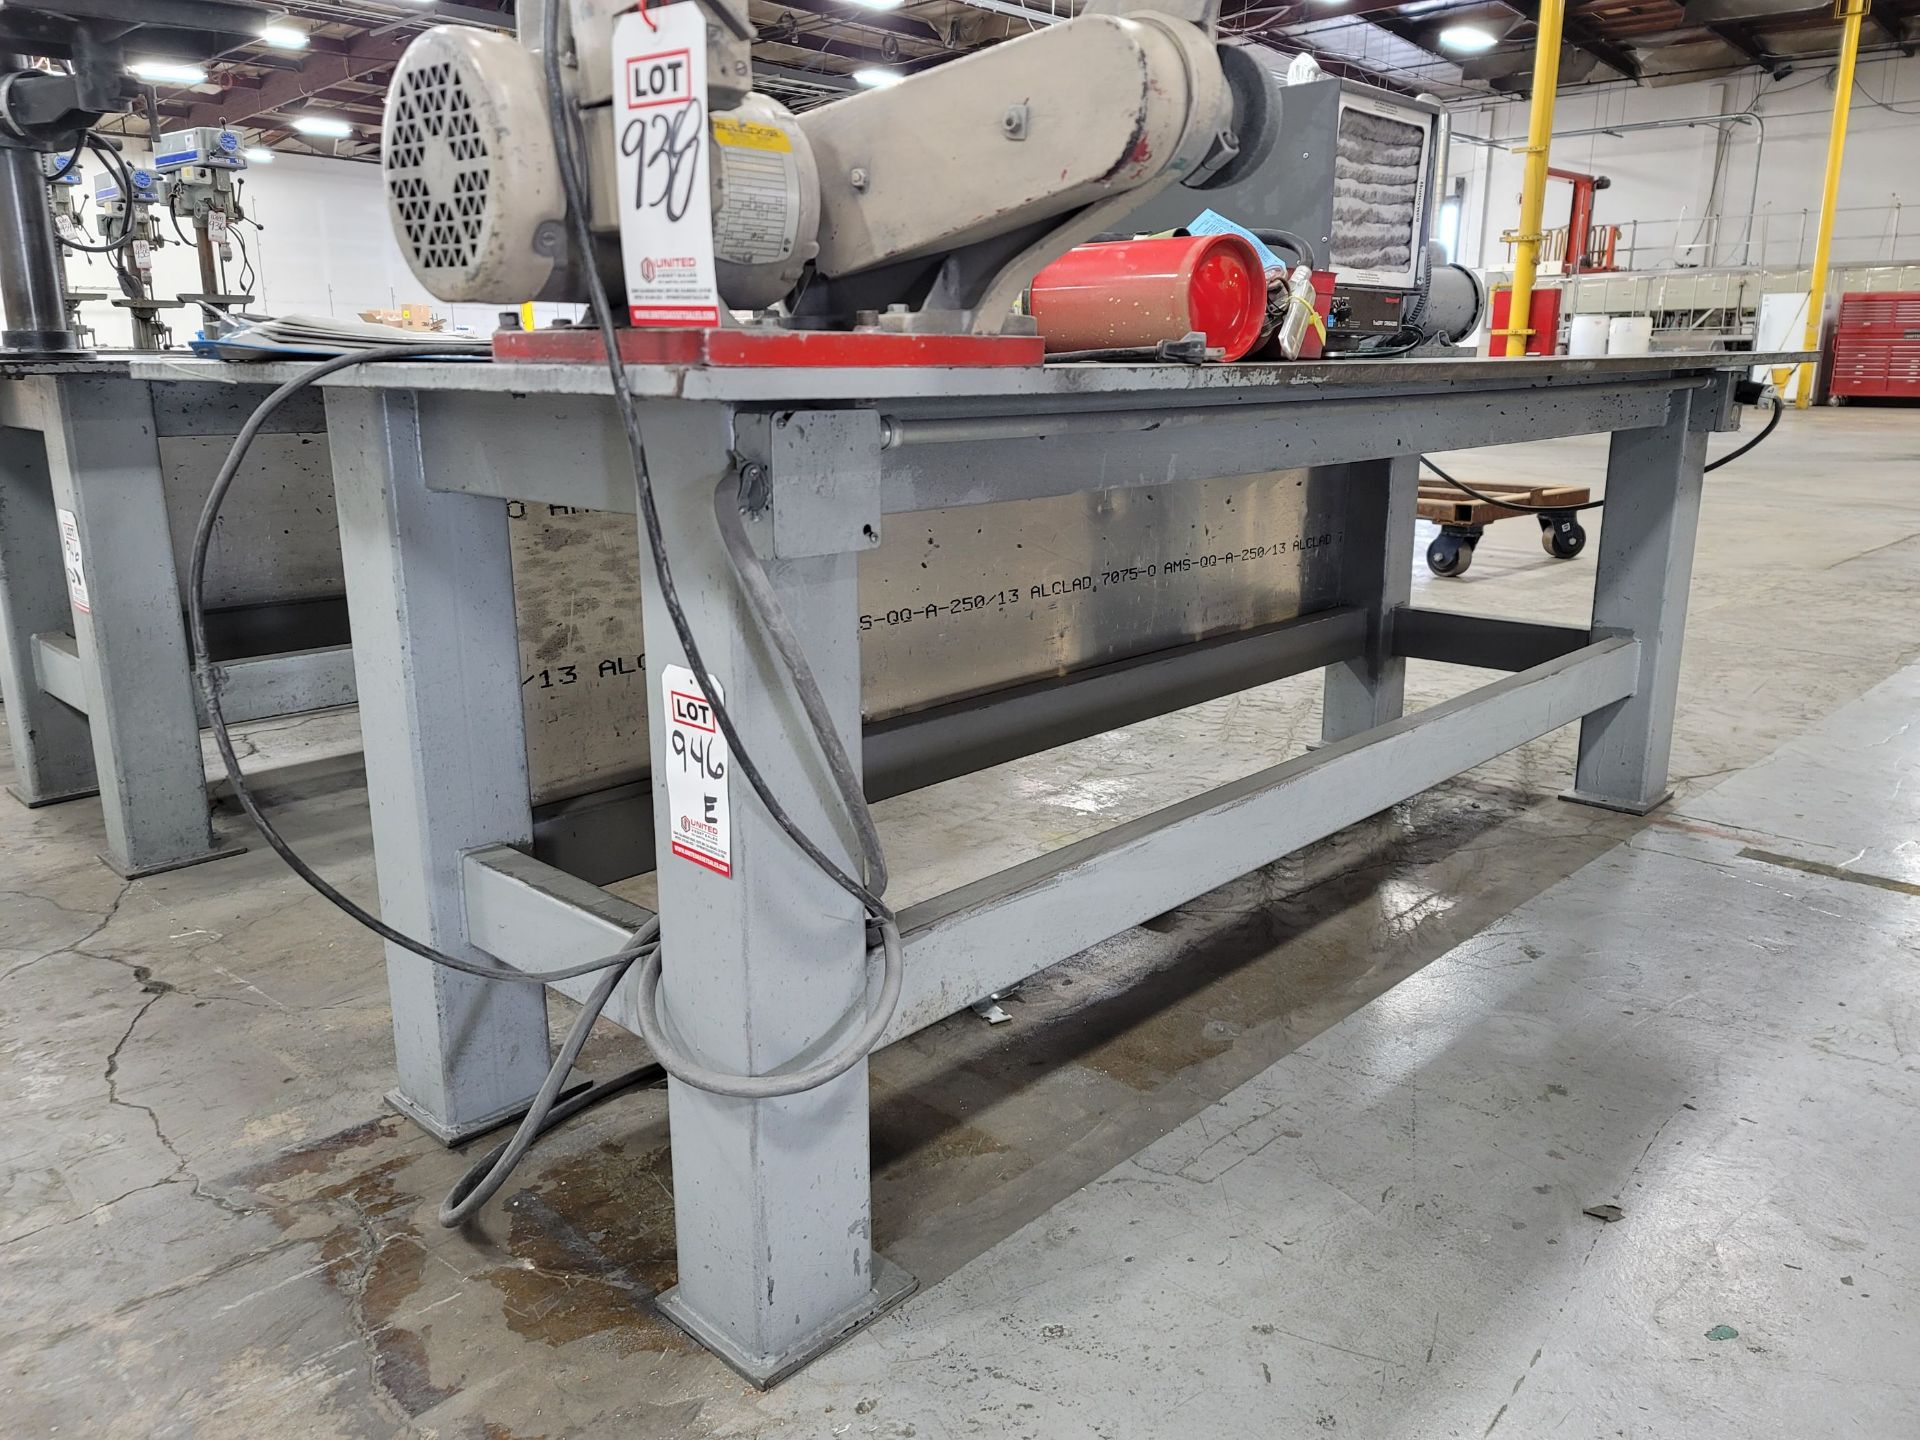 STEEL WELDING/FABRICATION TABLE W/ 3' X 8' X 3/4" STEEL TOP, ATTACHED TOOL IS NOT INCLUDED